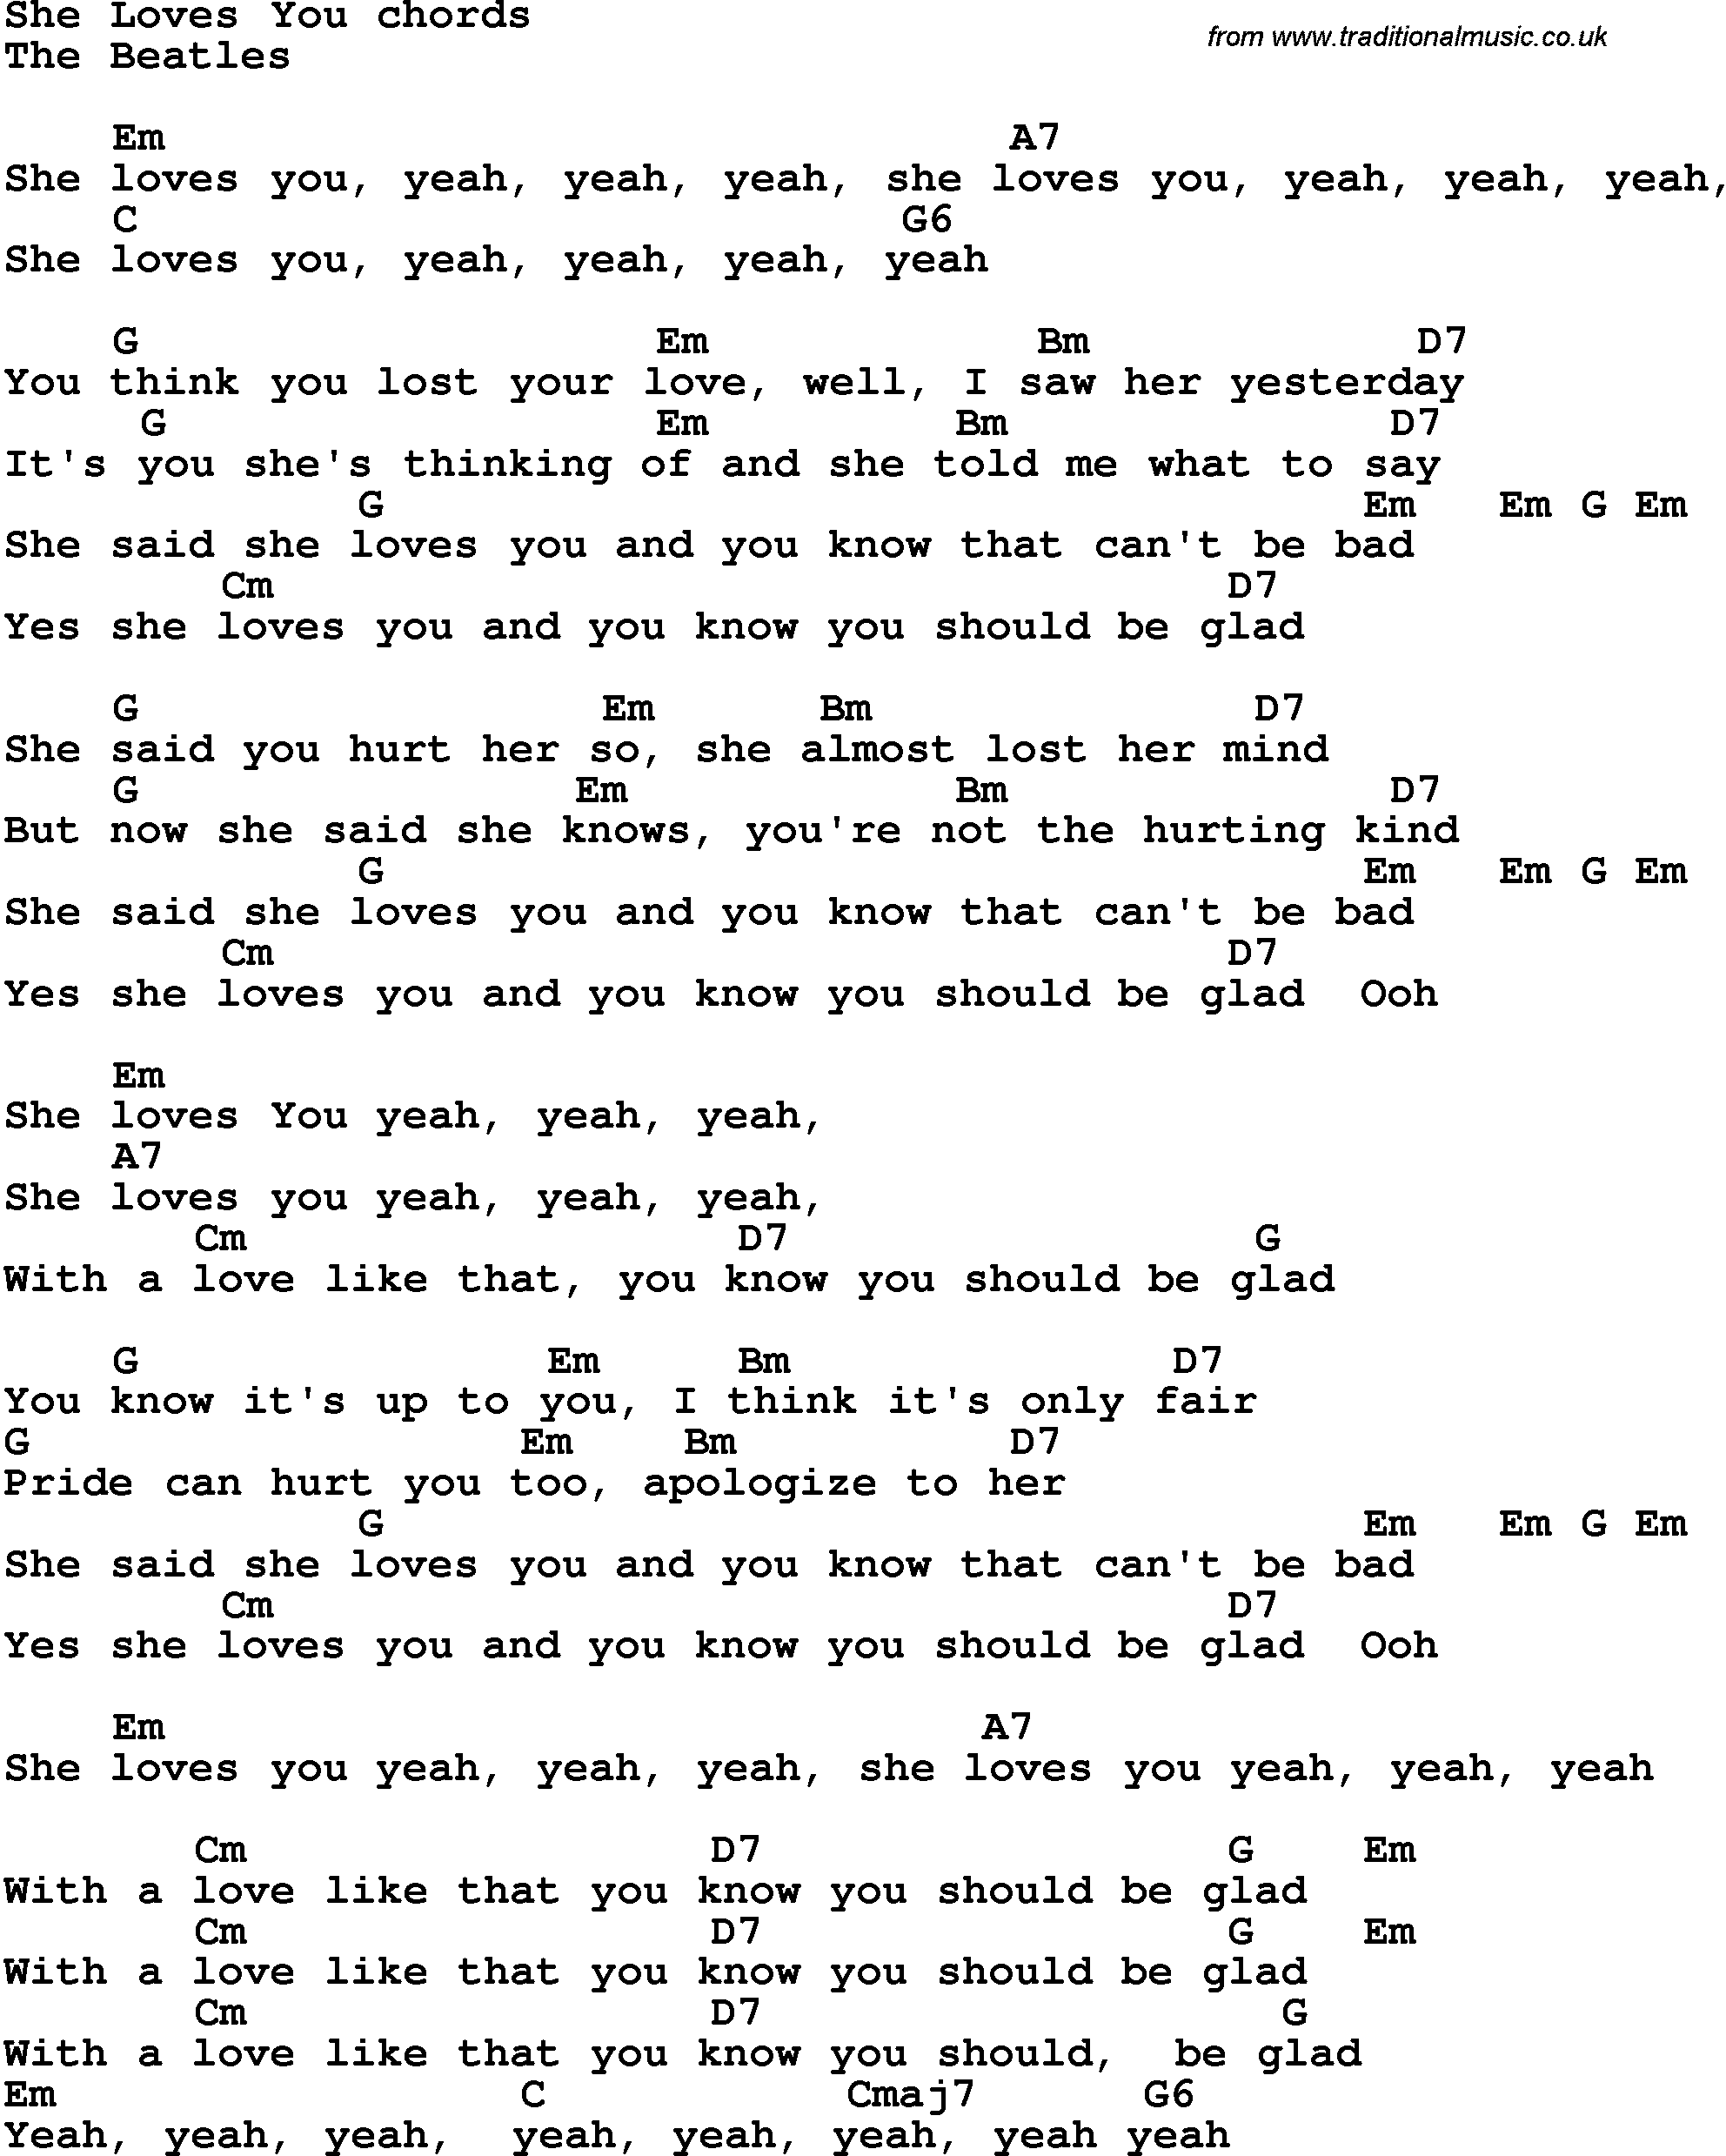 Song Lyrics with guitar chords for She Loves You - The Beatles